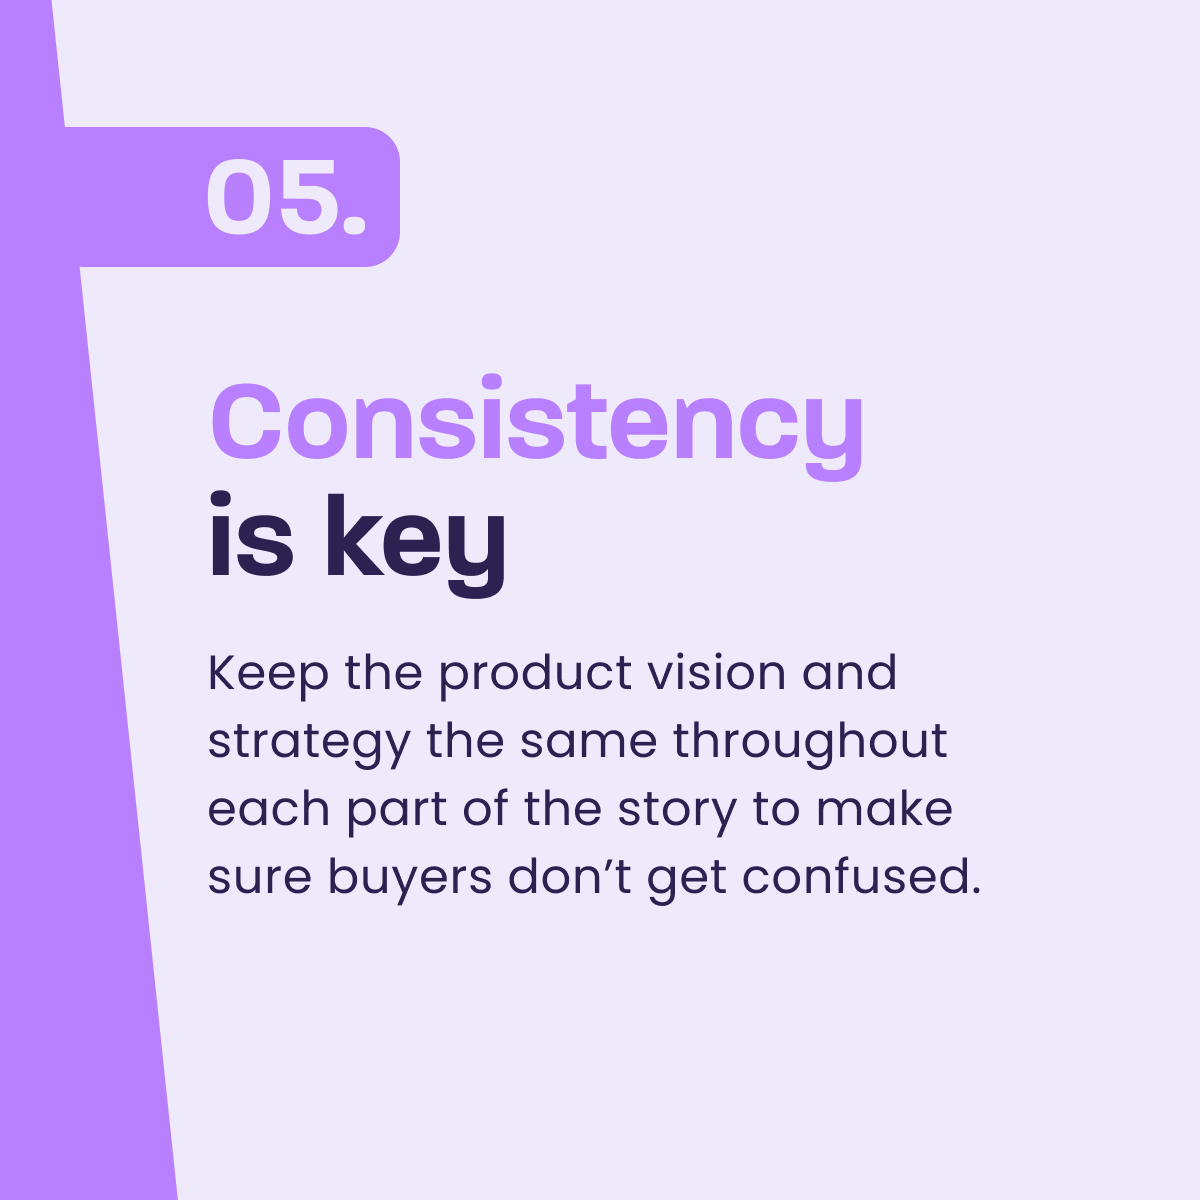 Keep your product story consistent